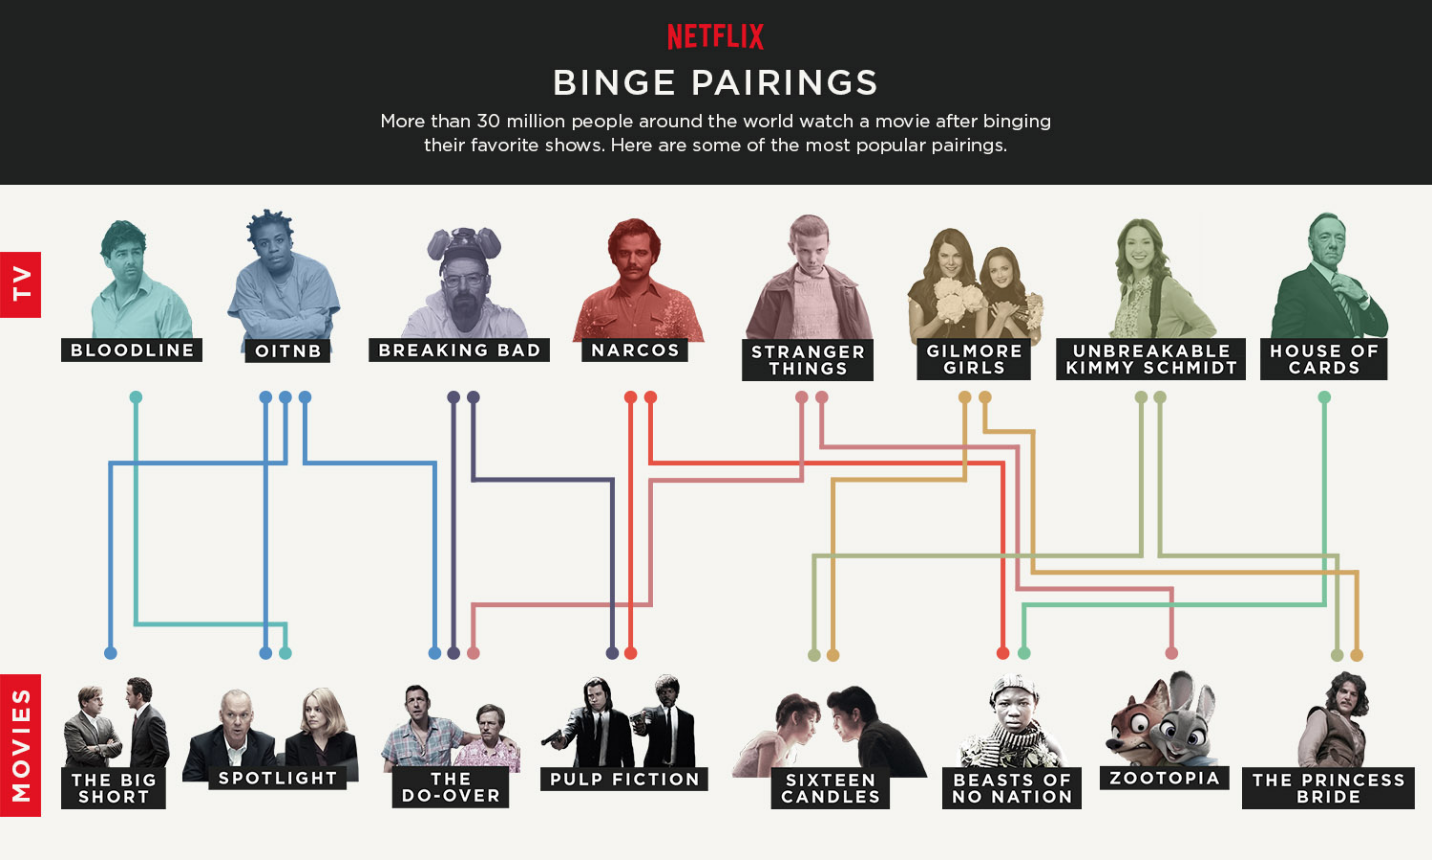 Netflix's binge pairings infographic shows the most popular pairings between shows binge-watched on the streaming service and the movies watched subsequently. (Netflix)